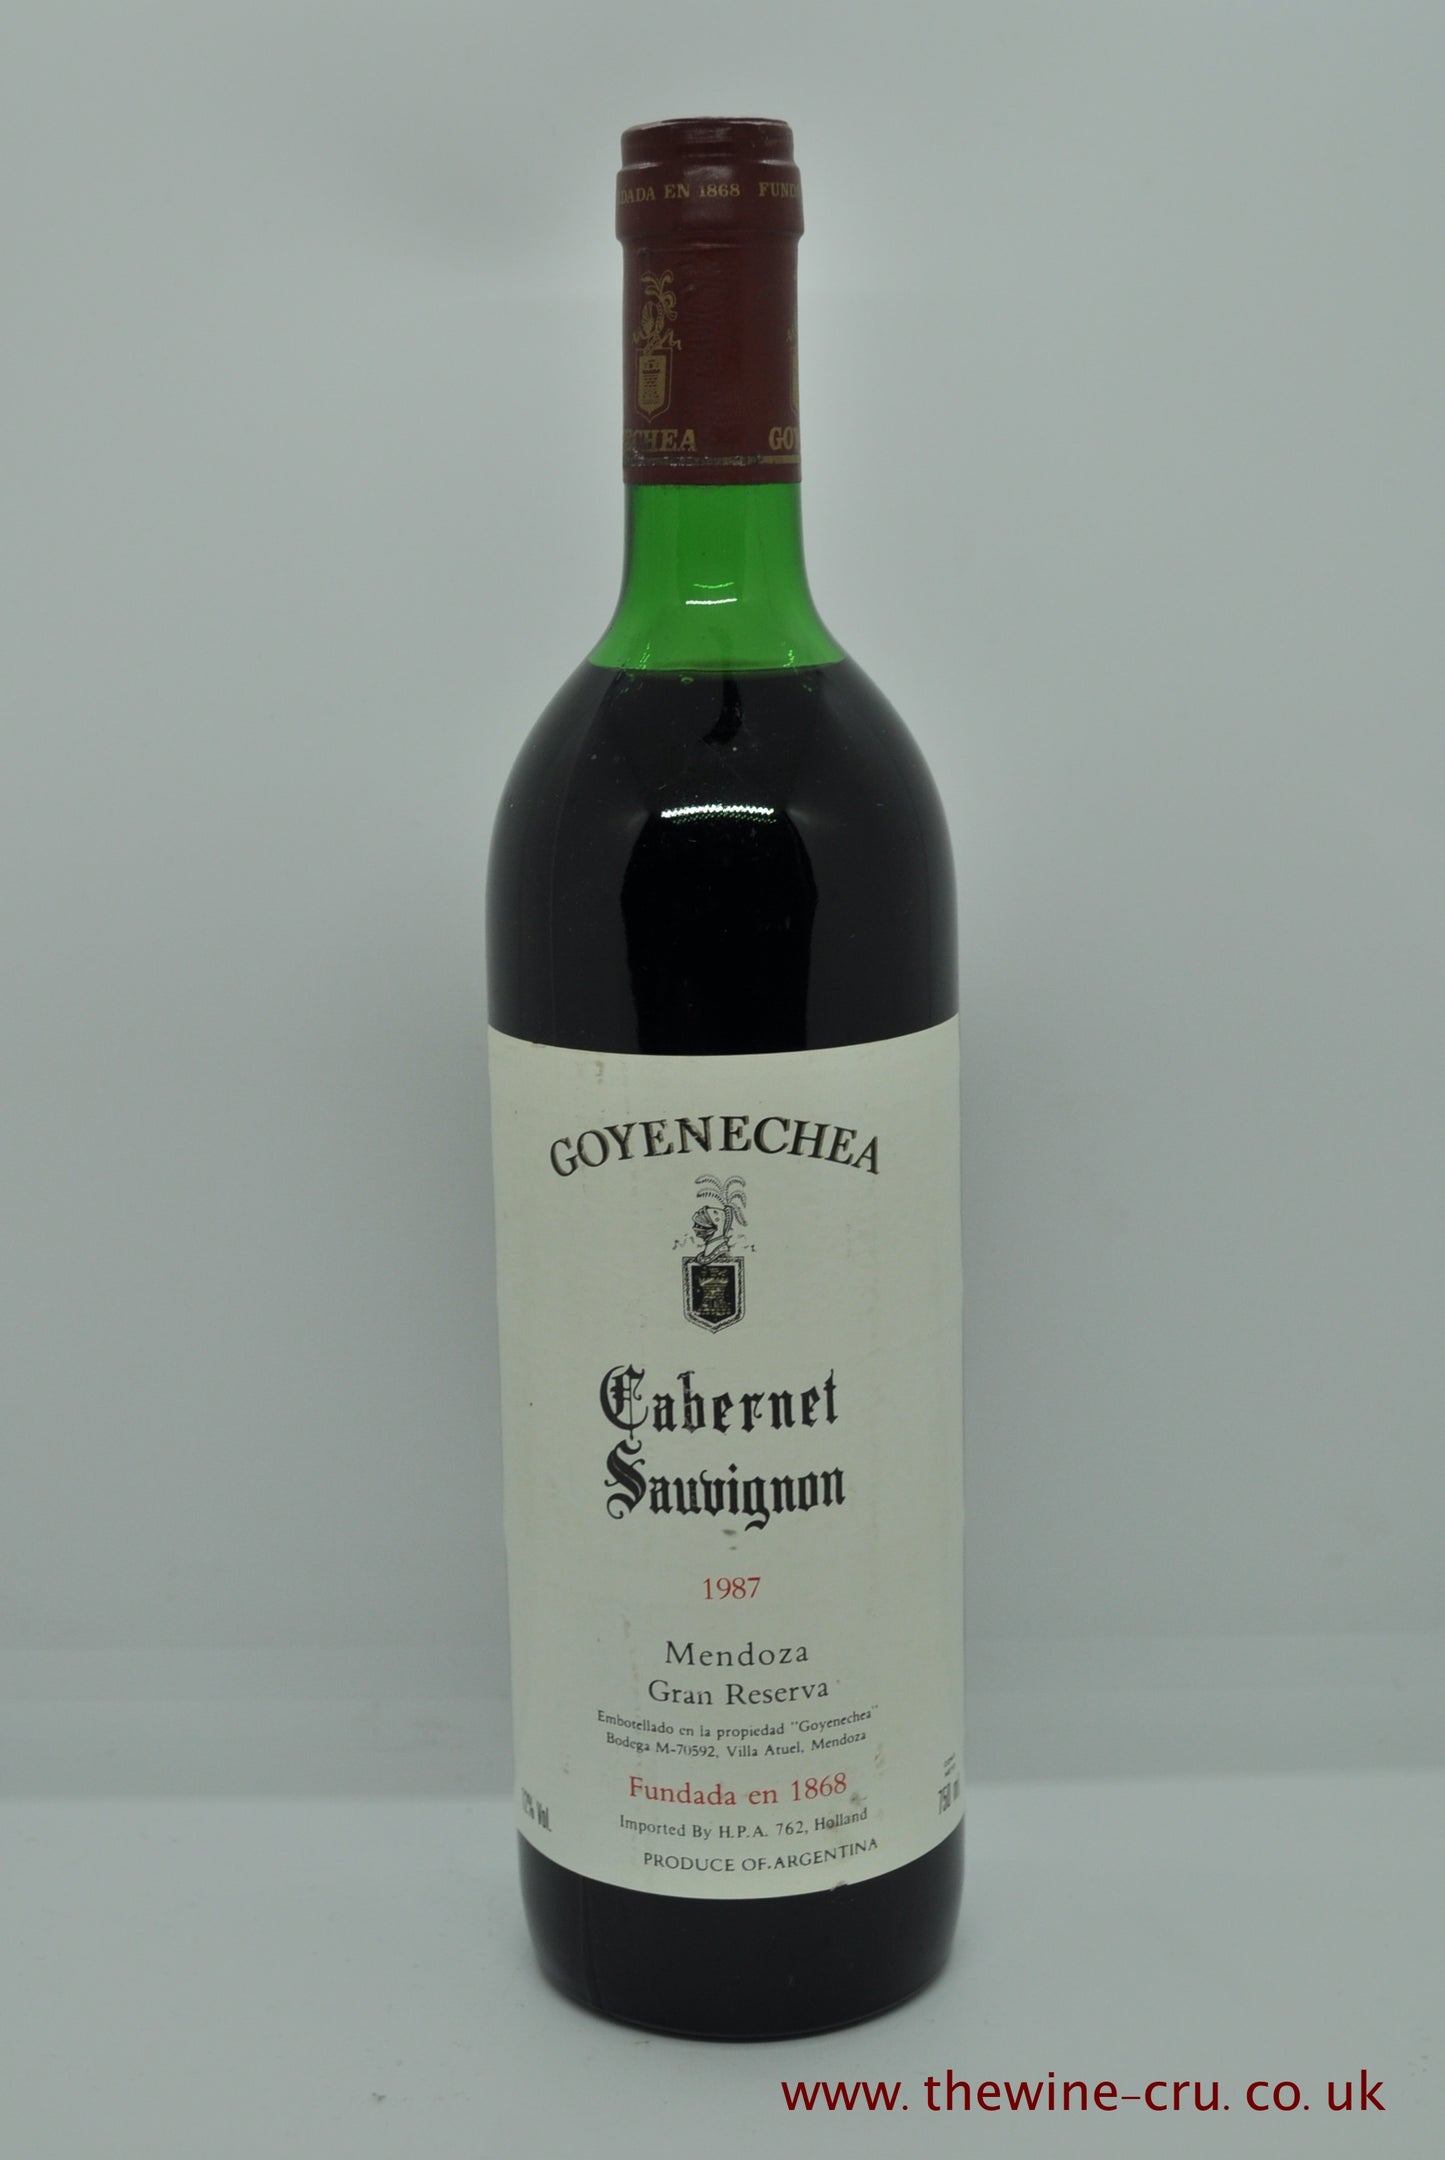 1987 vintage red wine. Goyenechea Cabernet sauvignon 1987. Argentina, Mendoza. Immediate delivery. Free local delivery. Gift wrapping available.